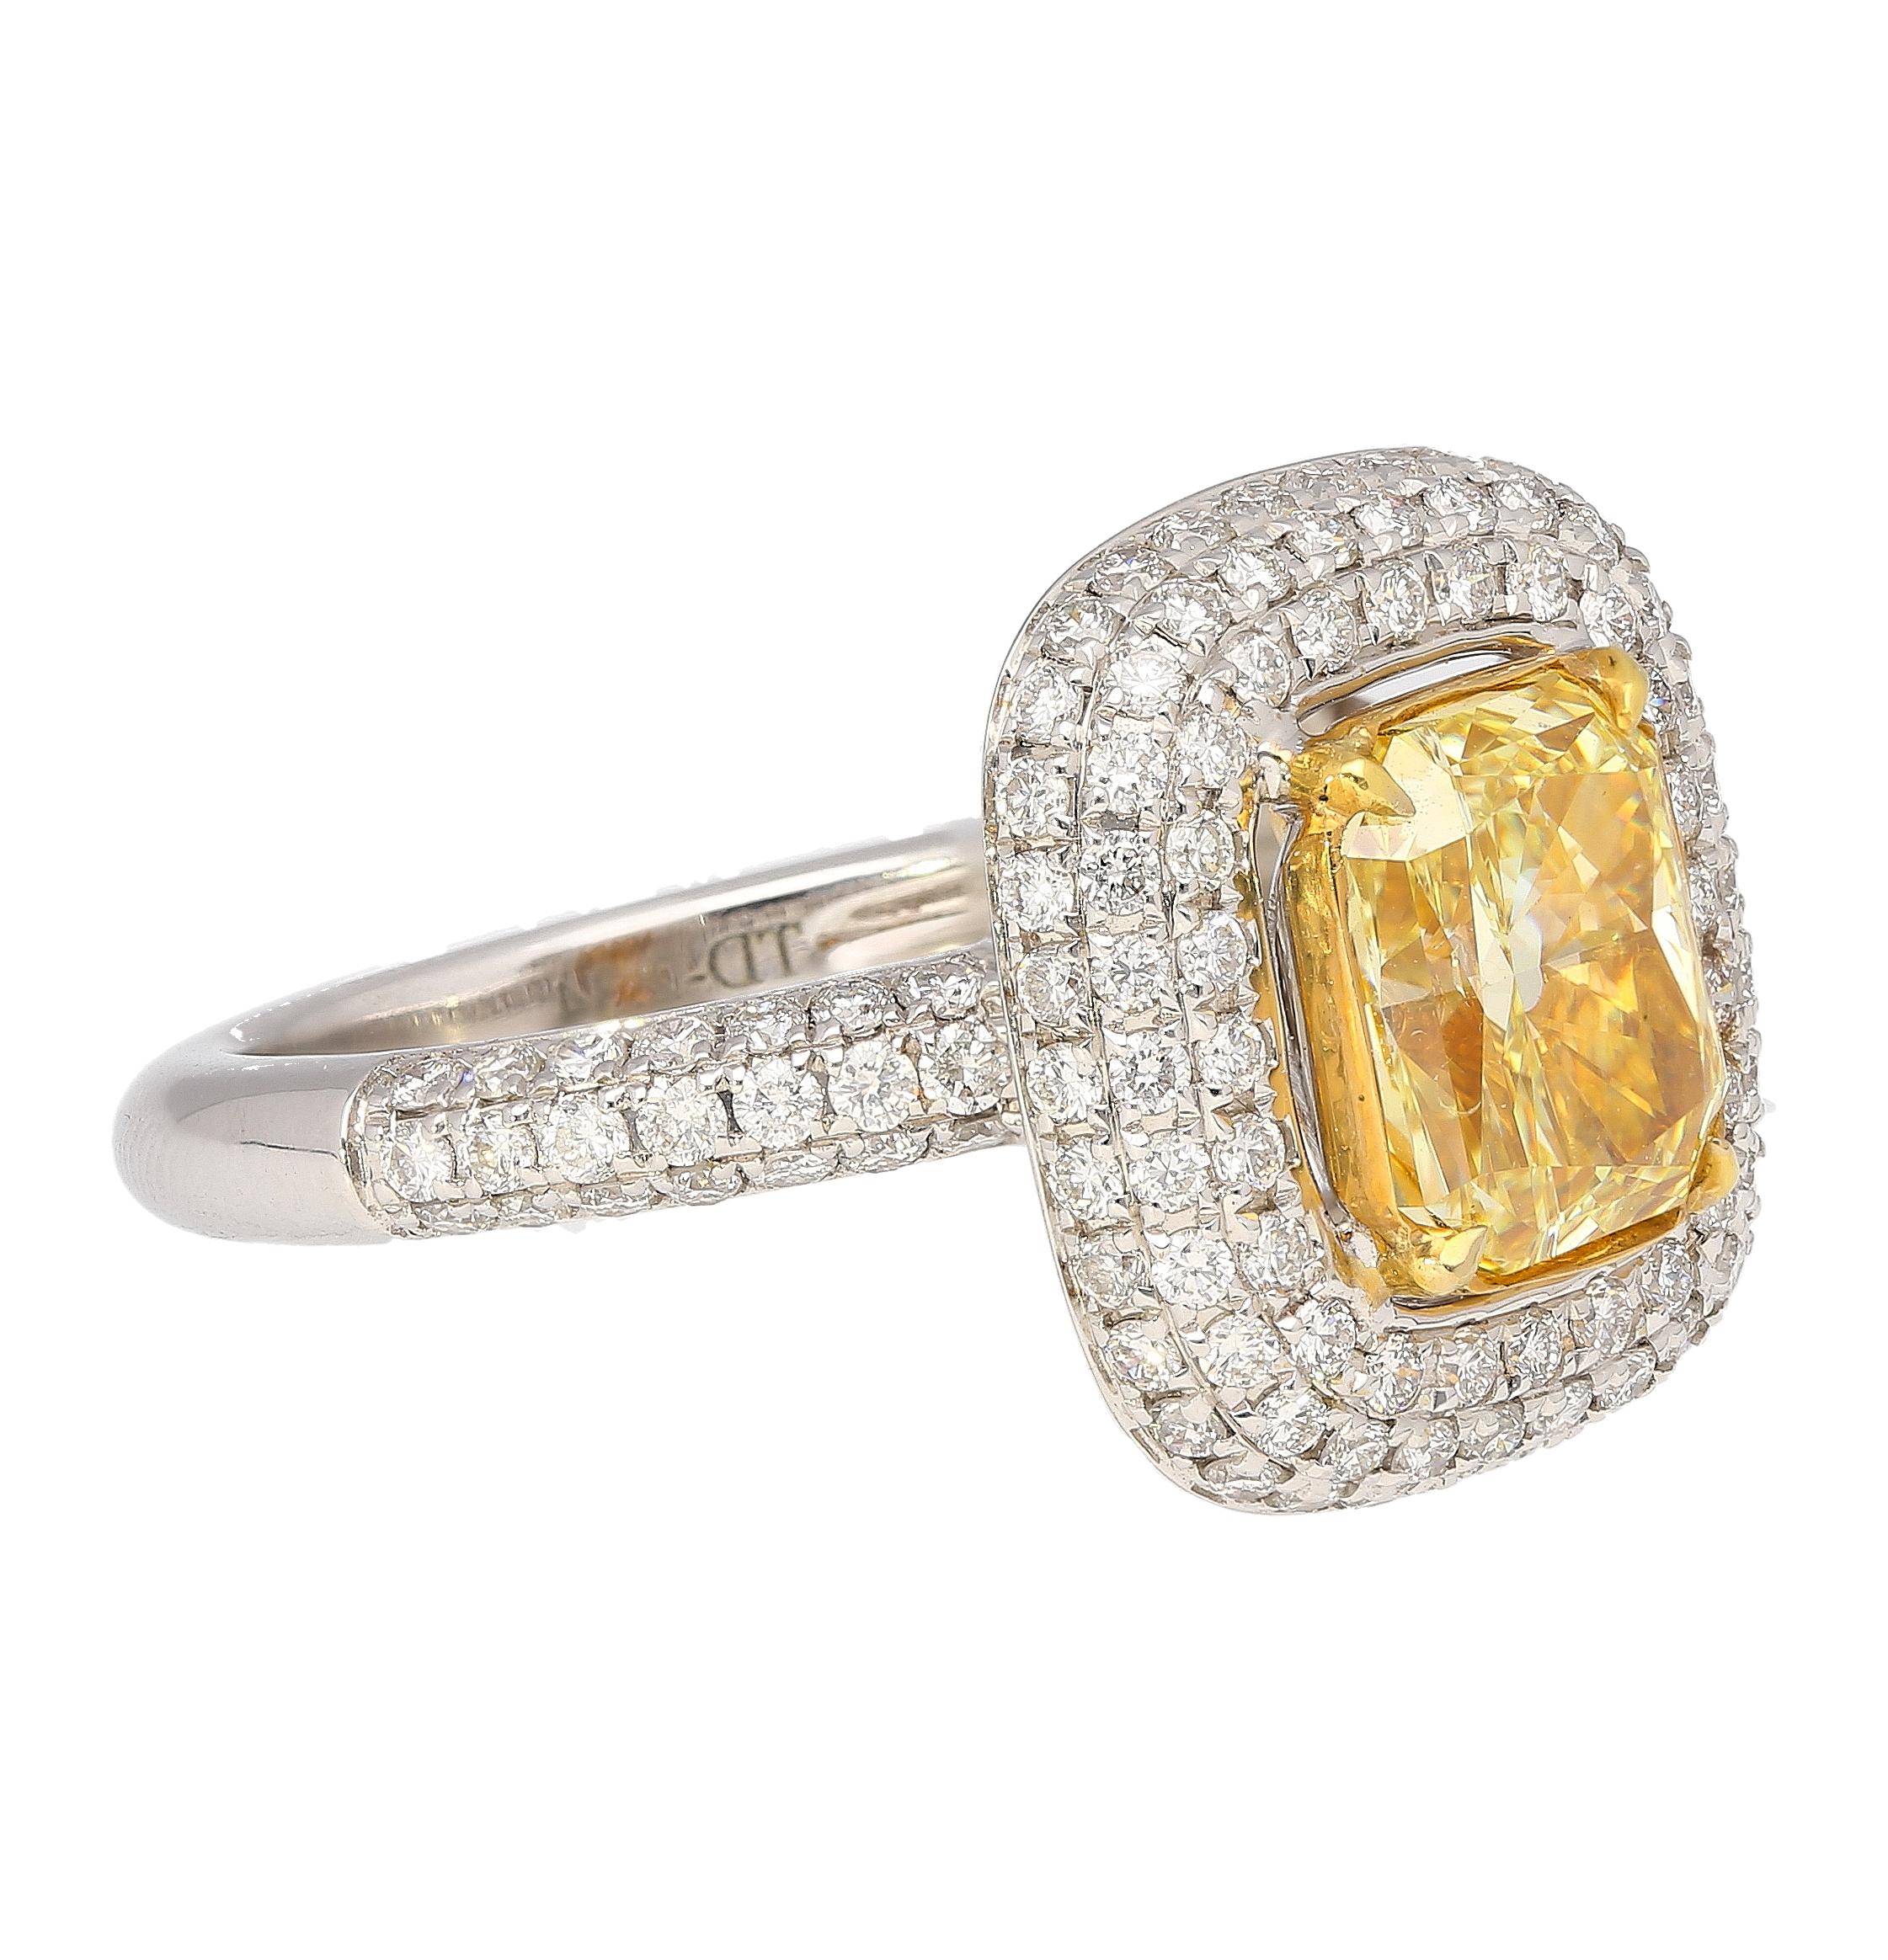 GIA Certified 2.35 Radiant Cut Fancy Yellow Diamond Ring in 18k White Gold In New Condition For Sale In Miami, FL